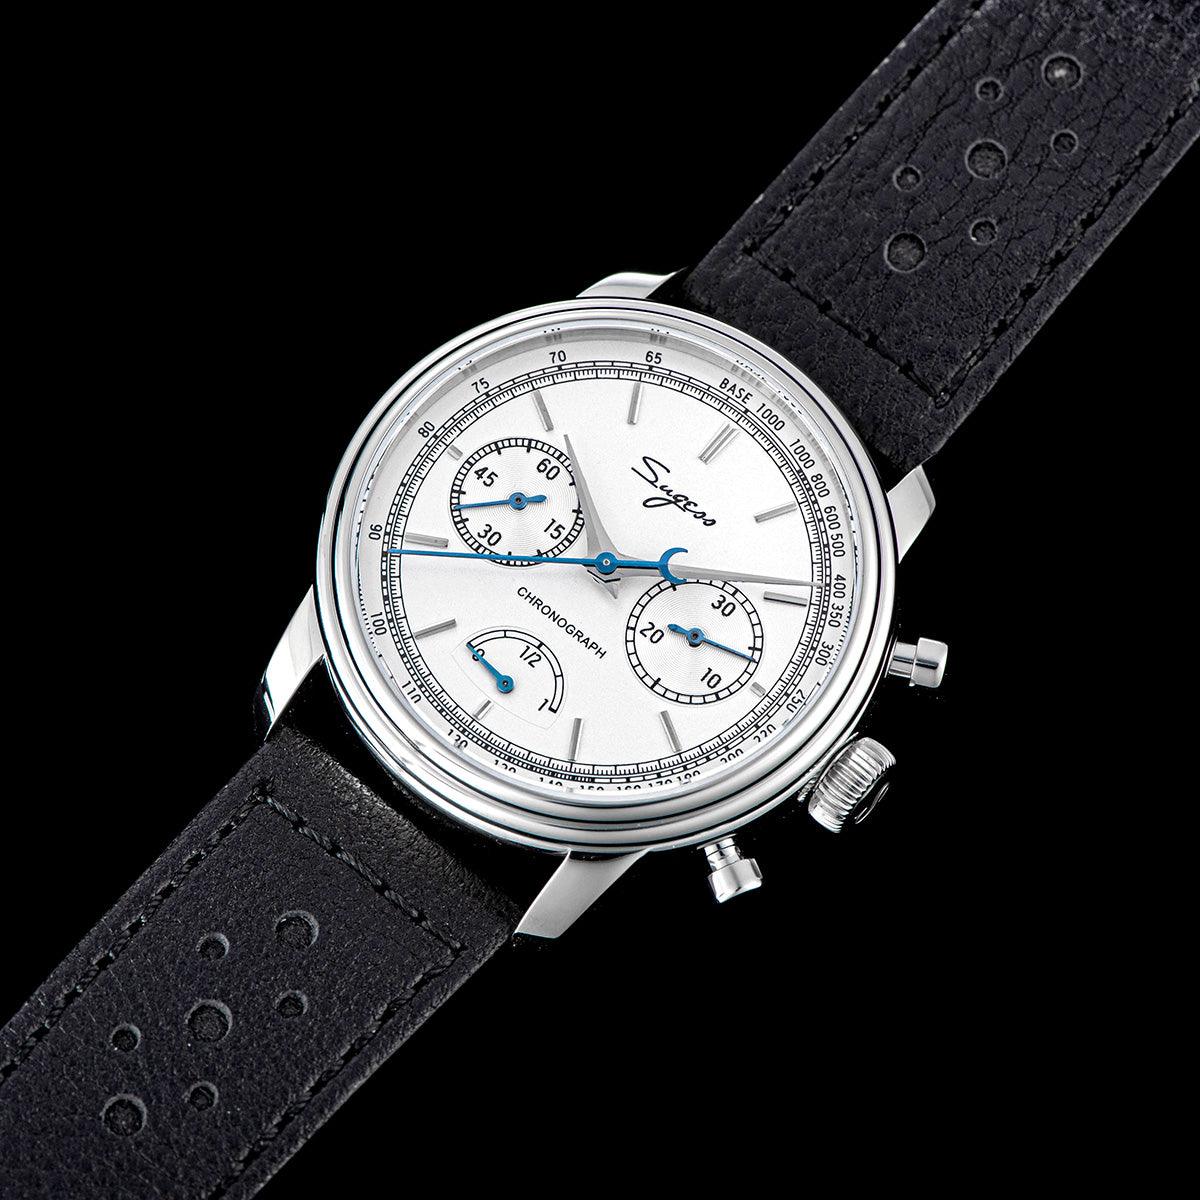 Sugess ST1906 White Dial Multi-Function Mechanical Power Reserve Seagull Movement Men's Watch - Murphy Johnson Watches Co.